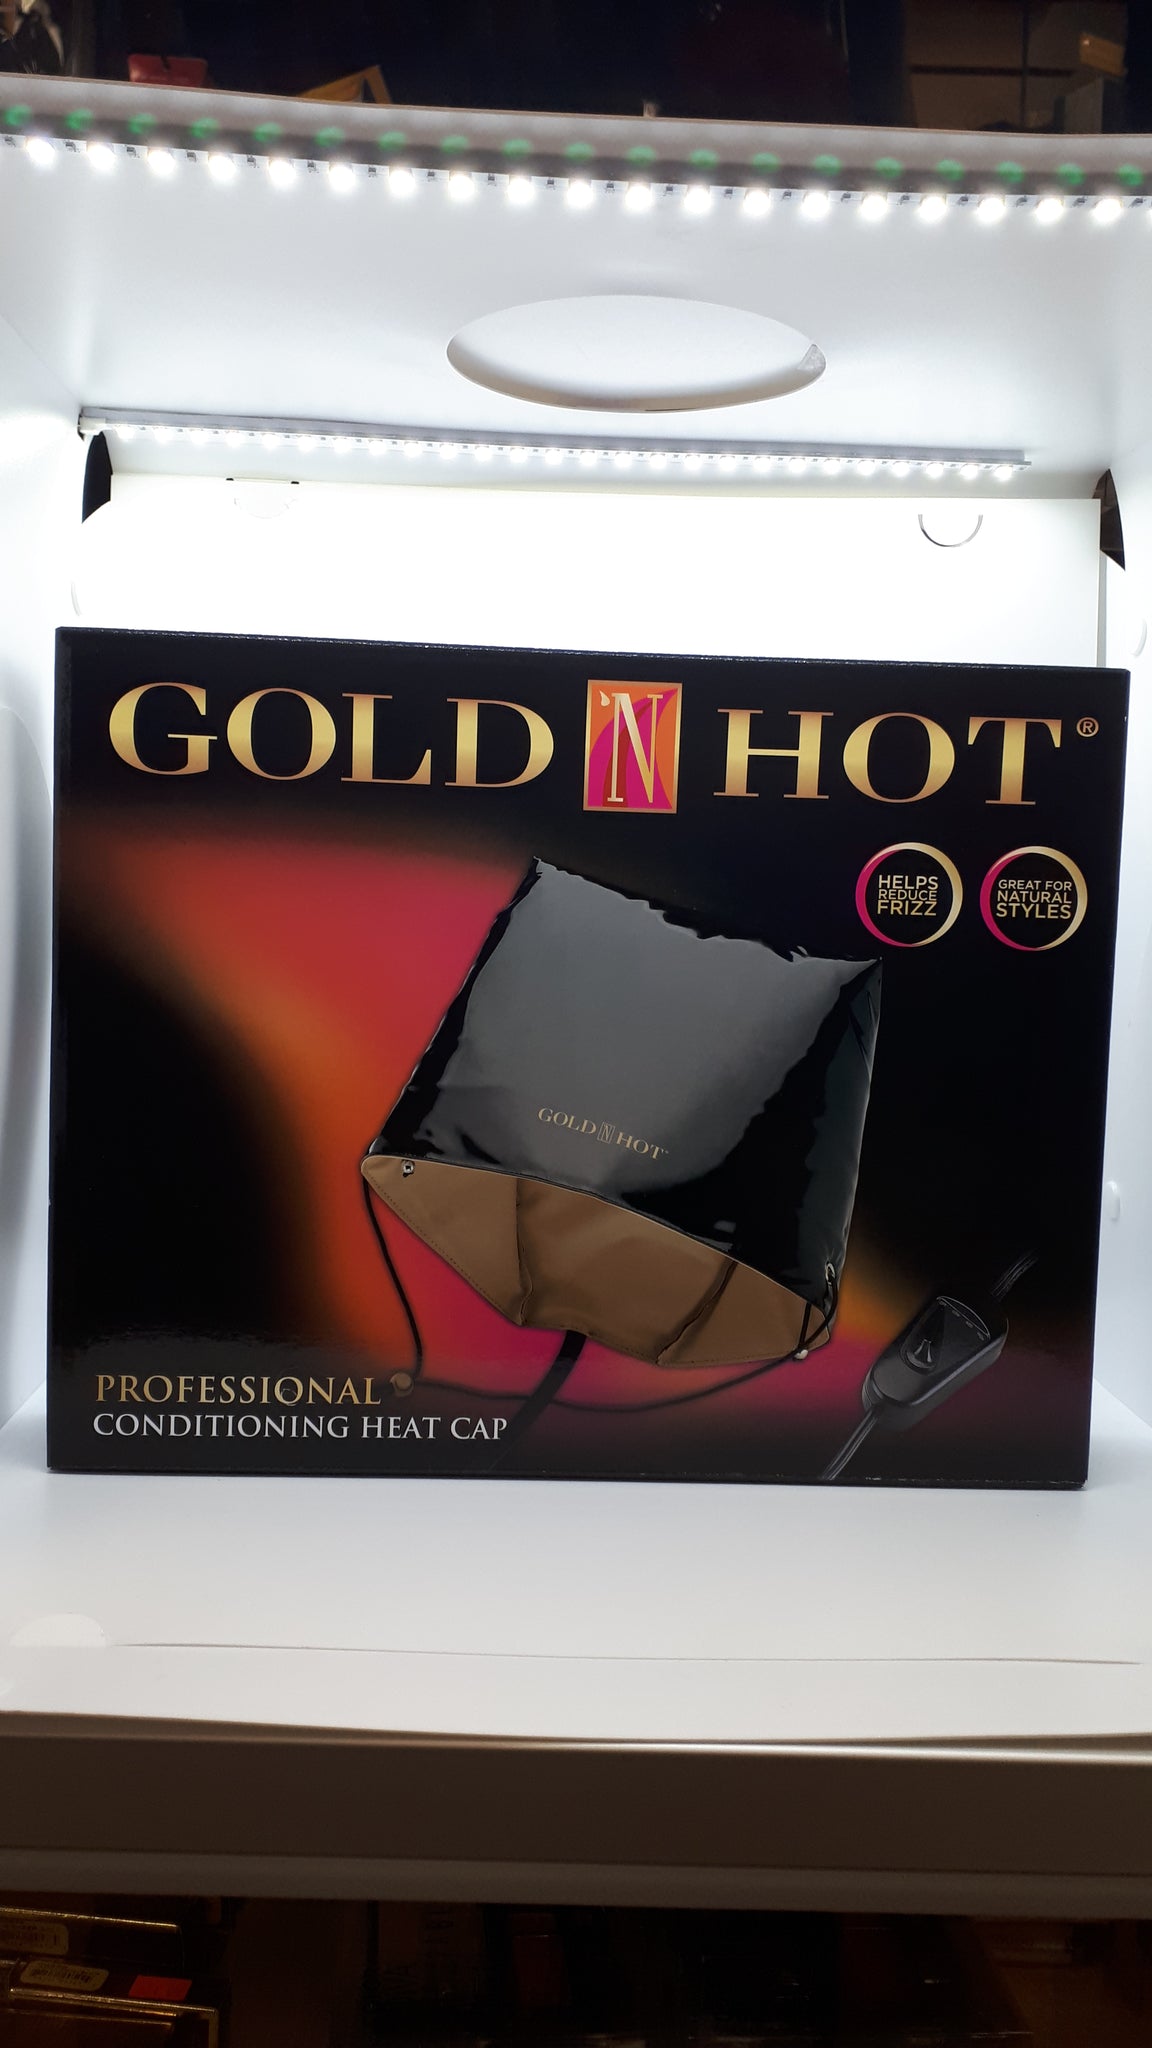 GOLD 'N HOT PROFESSIONAL CONDITIONING HEAT CAP